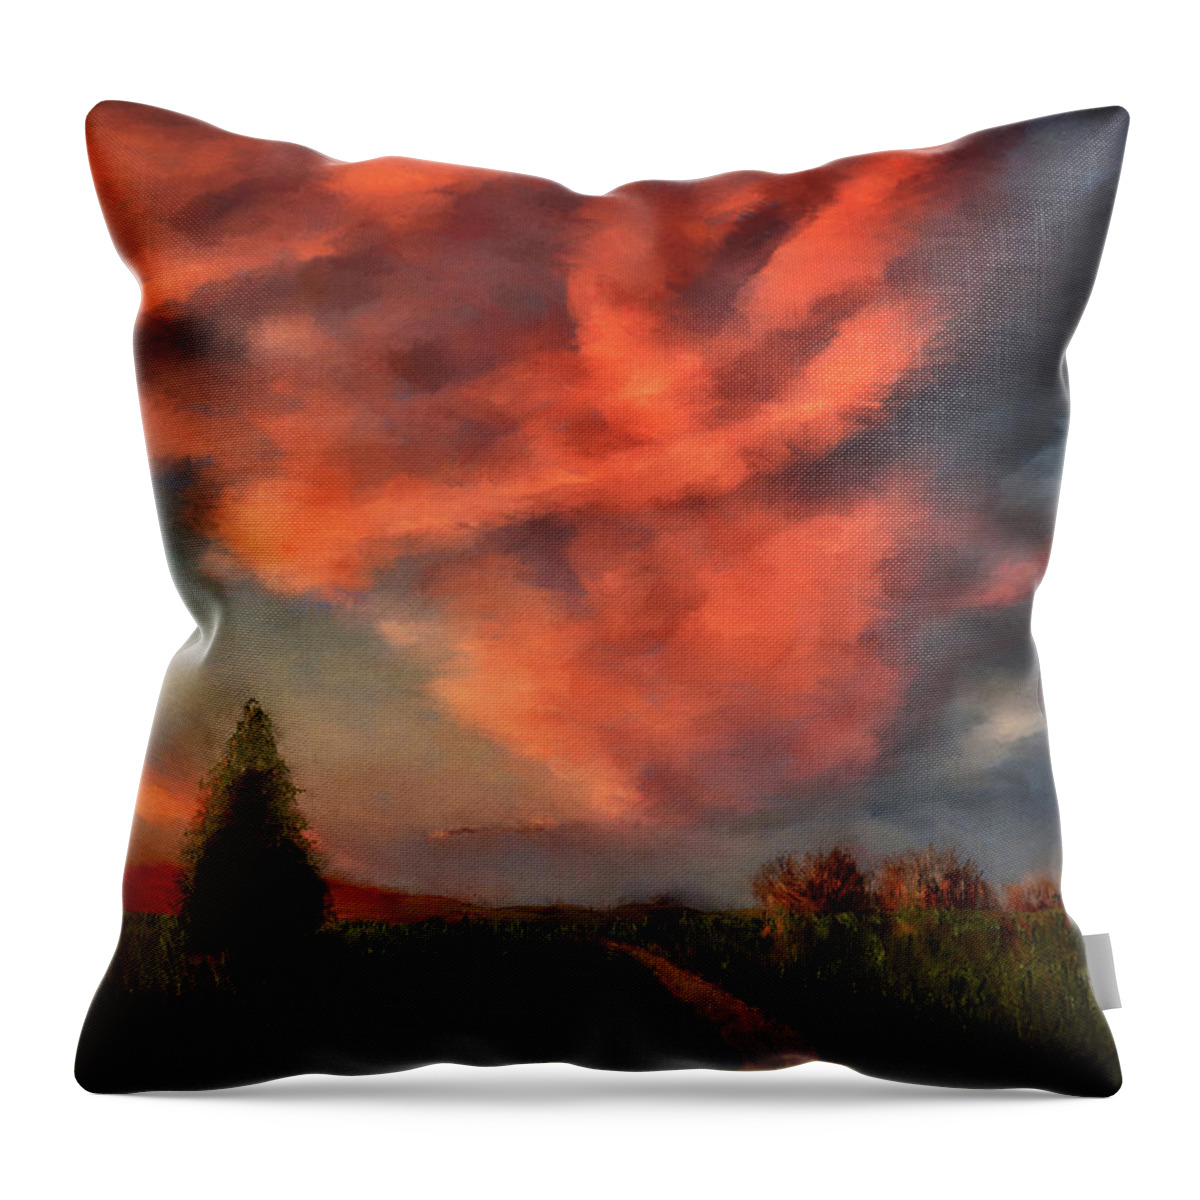 Sunset Throw Pillow featuring the digital art Going Home by Lois Bryan